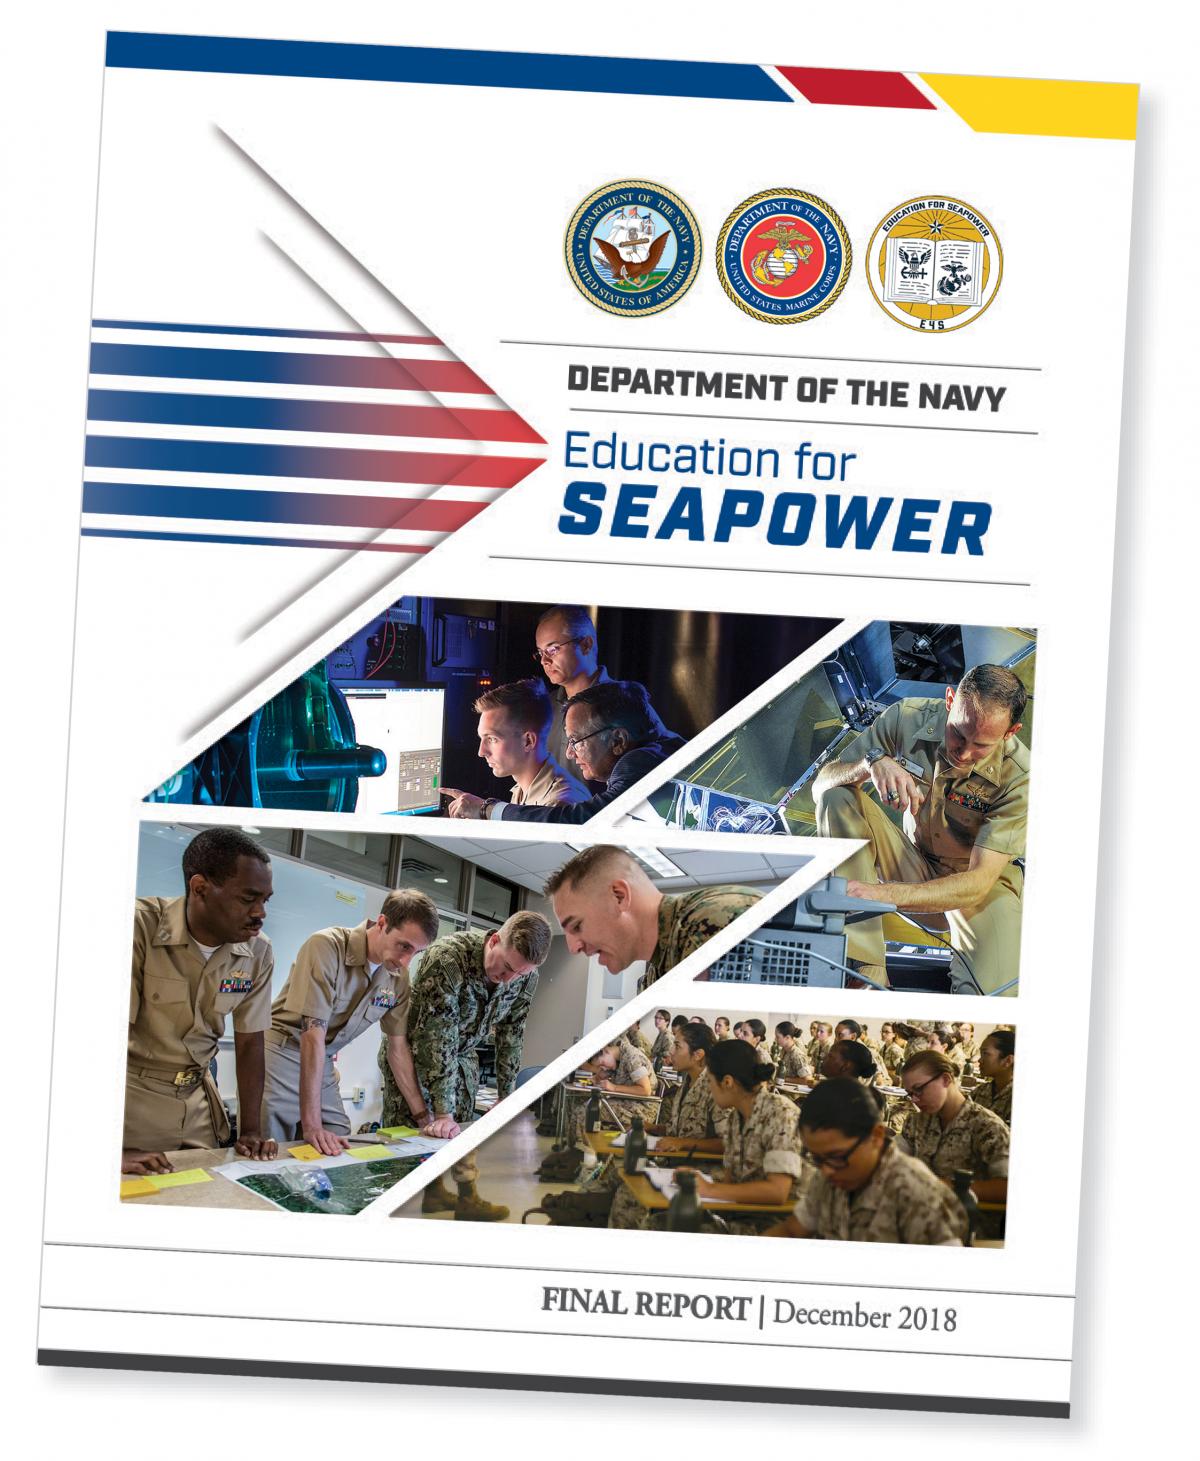 Education for Seapower, Final Report, 2018